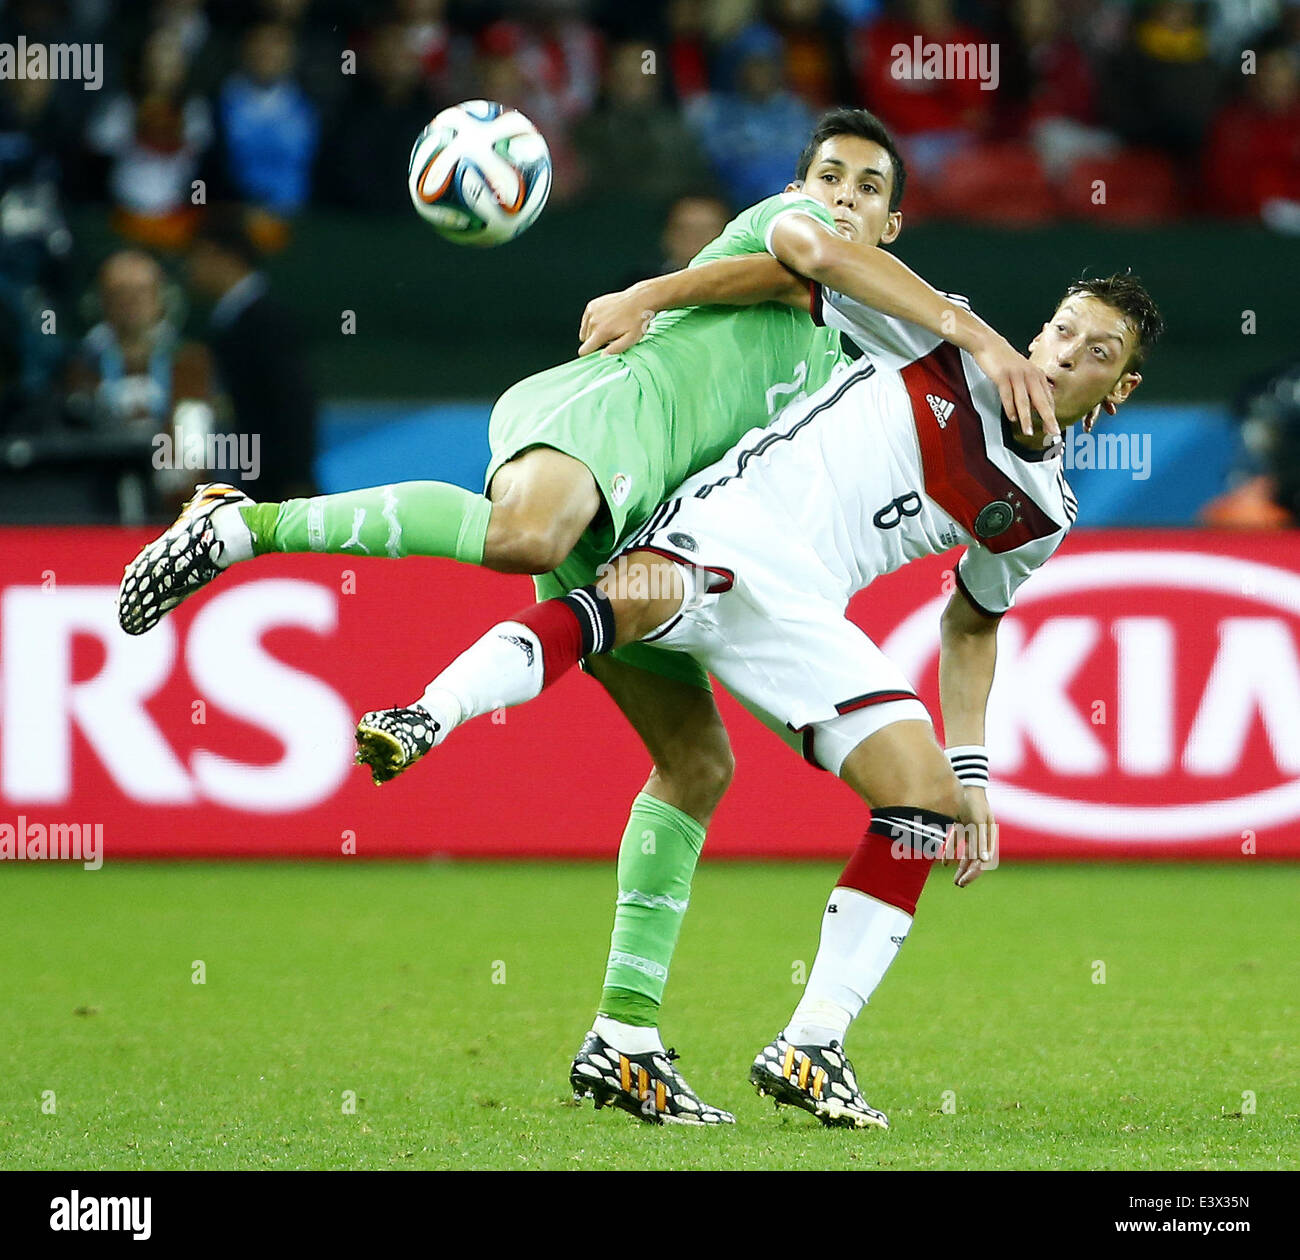 Porto Alegre, Brazil. 30th June, 2014. Germany's Mesut Ozil vies with Algeria's Aissa Mandi during a Round of 16 match between Germany and Algeria of 2014 FIFA World Cup at the Estadio Beira-Rio Stadium in Porto Alegre, Brazil, on June 30, 2014. Germany won 2-1 over Algeria after 120 minutes and qualified for quarter-finals on Monday. Credit:  Chen Jianli/Xinhua/Alamy Live News Stock Photo